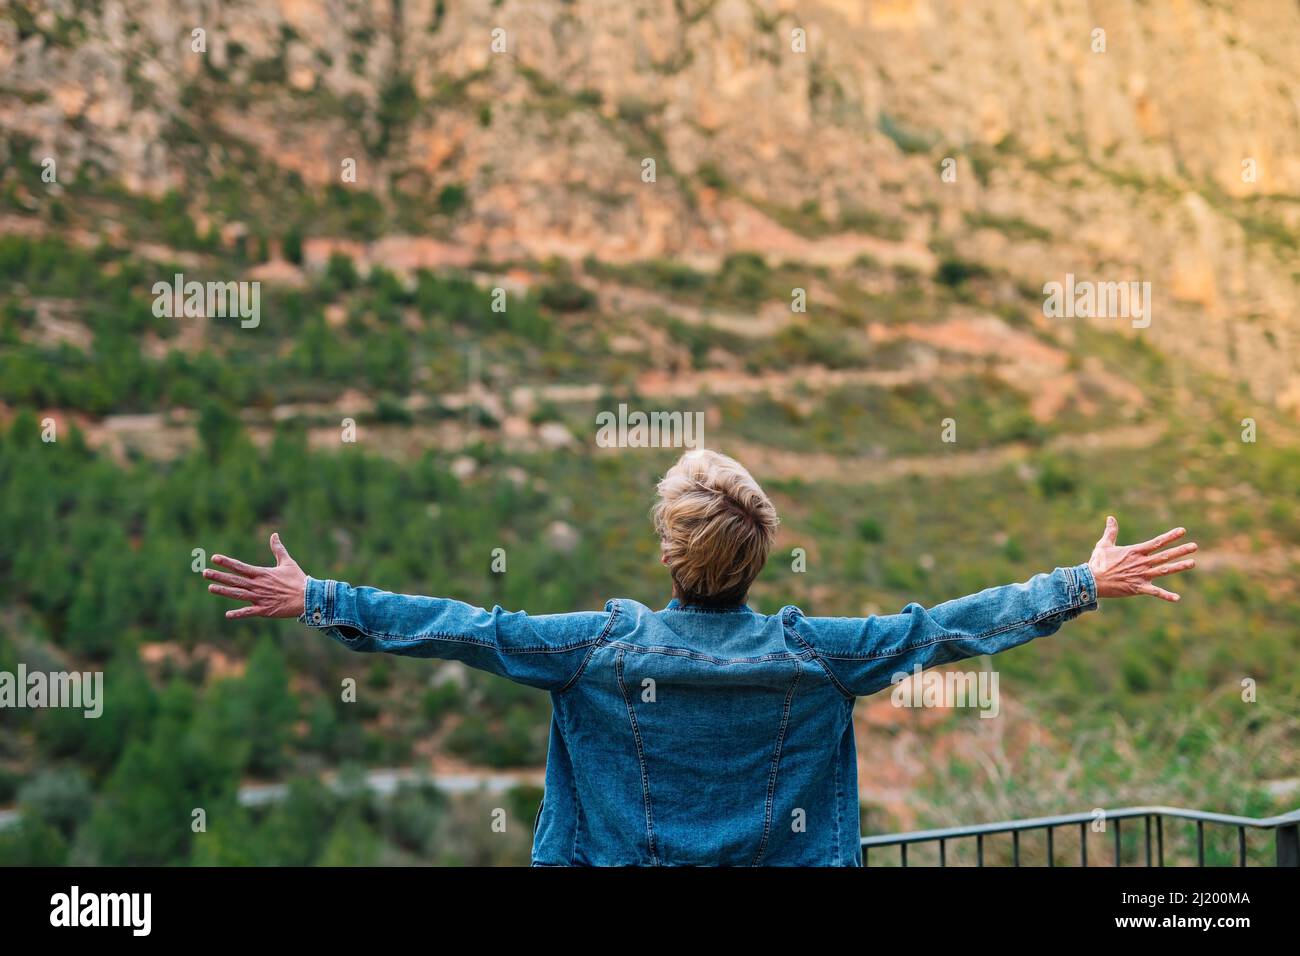 adult blonde short haired woman on holiday enjoying the scenery with her arms outstretched. Stock Photo